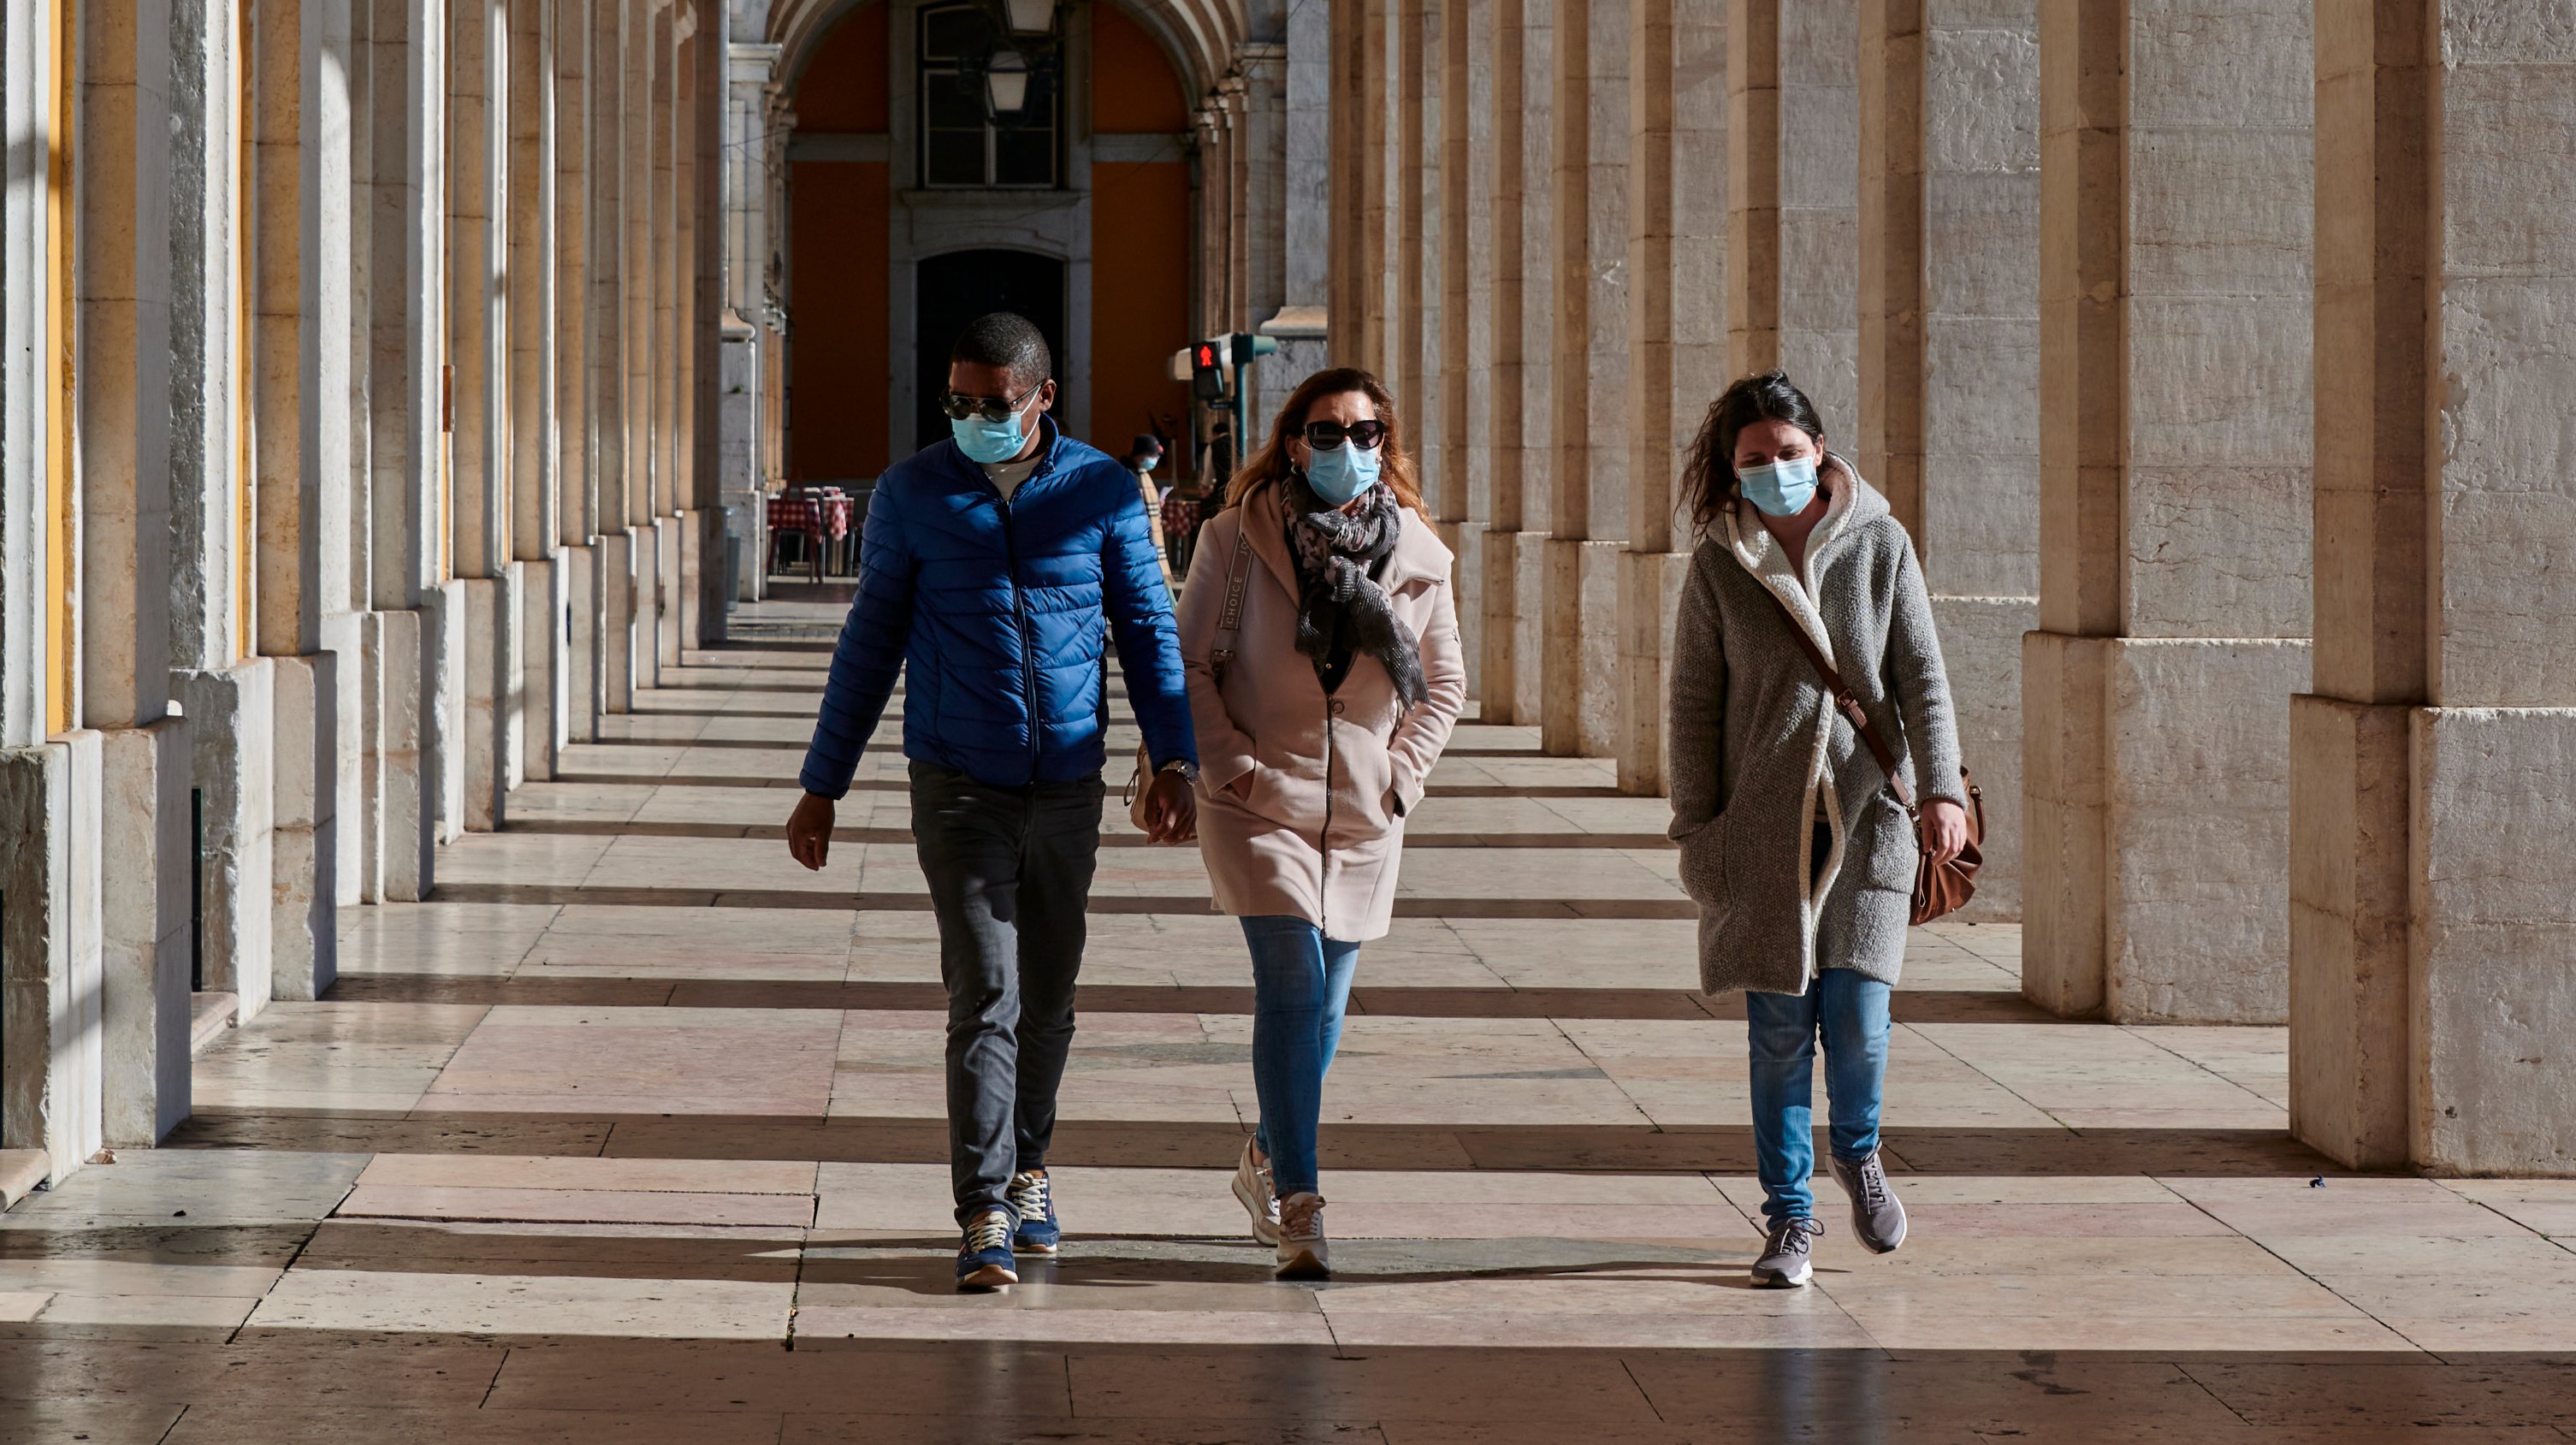 Few People In Lisbon Streets As Portugal Suffers An Increase Of COVID-19 Infections